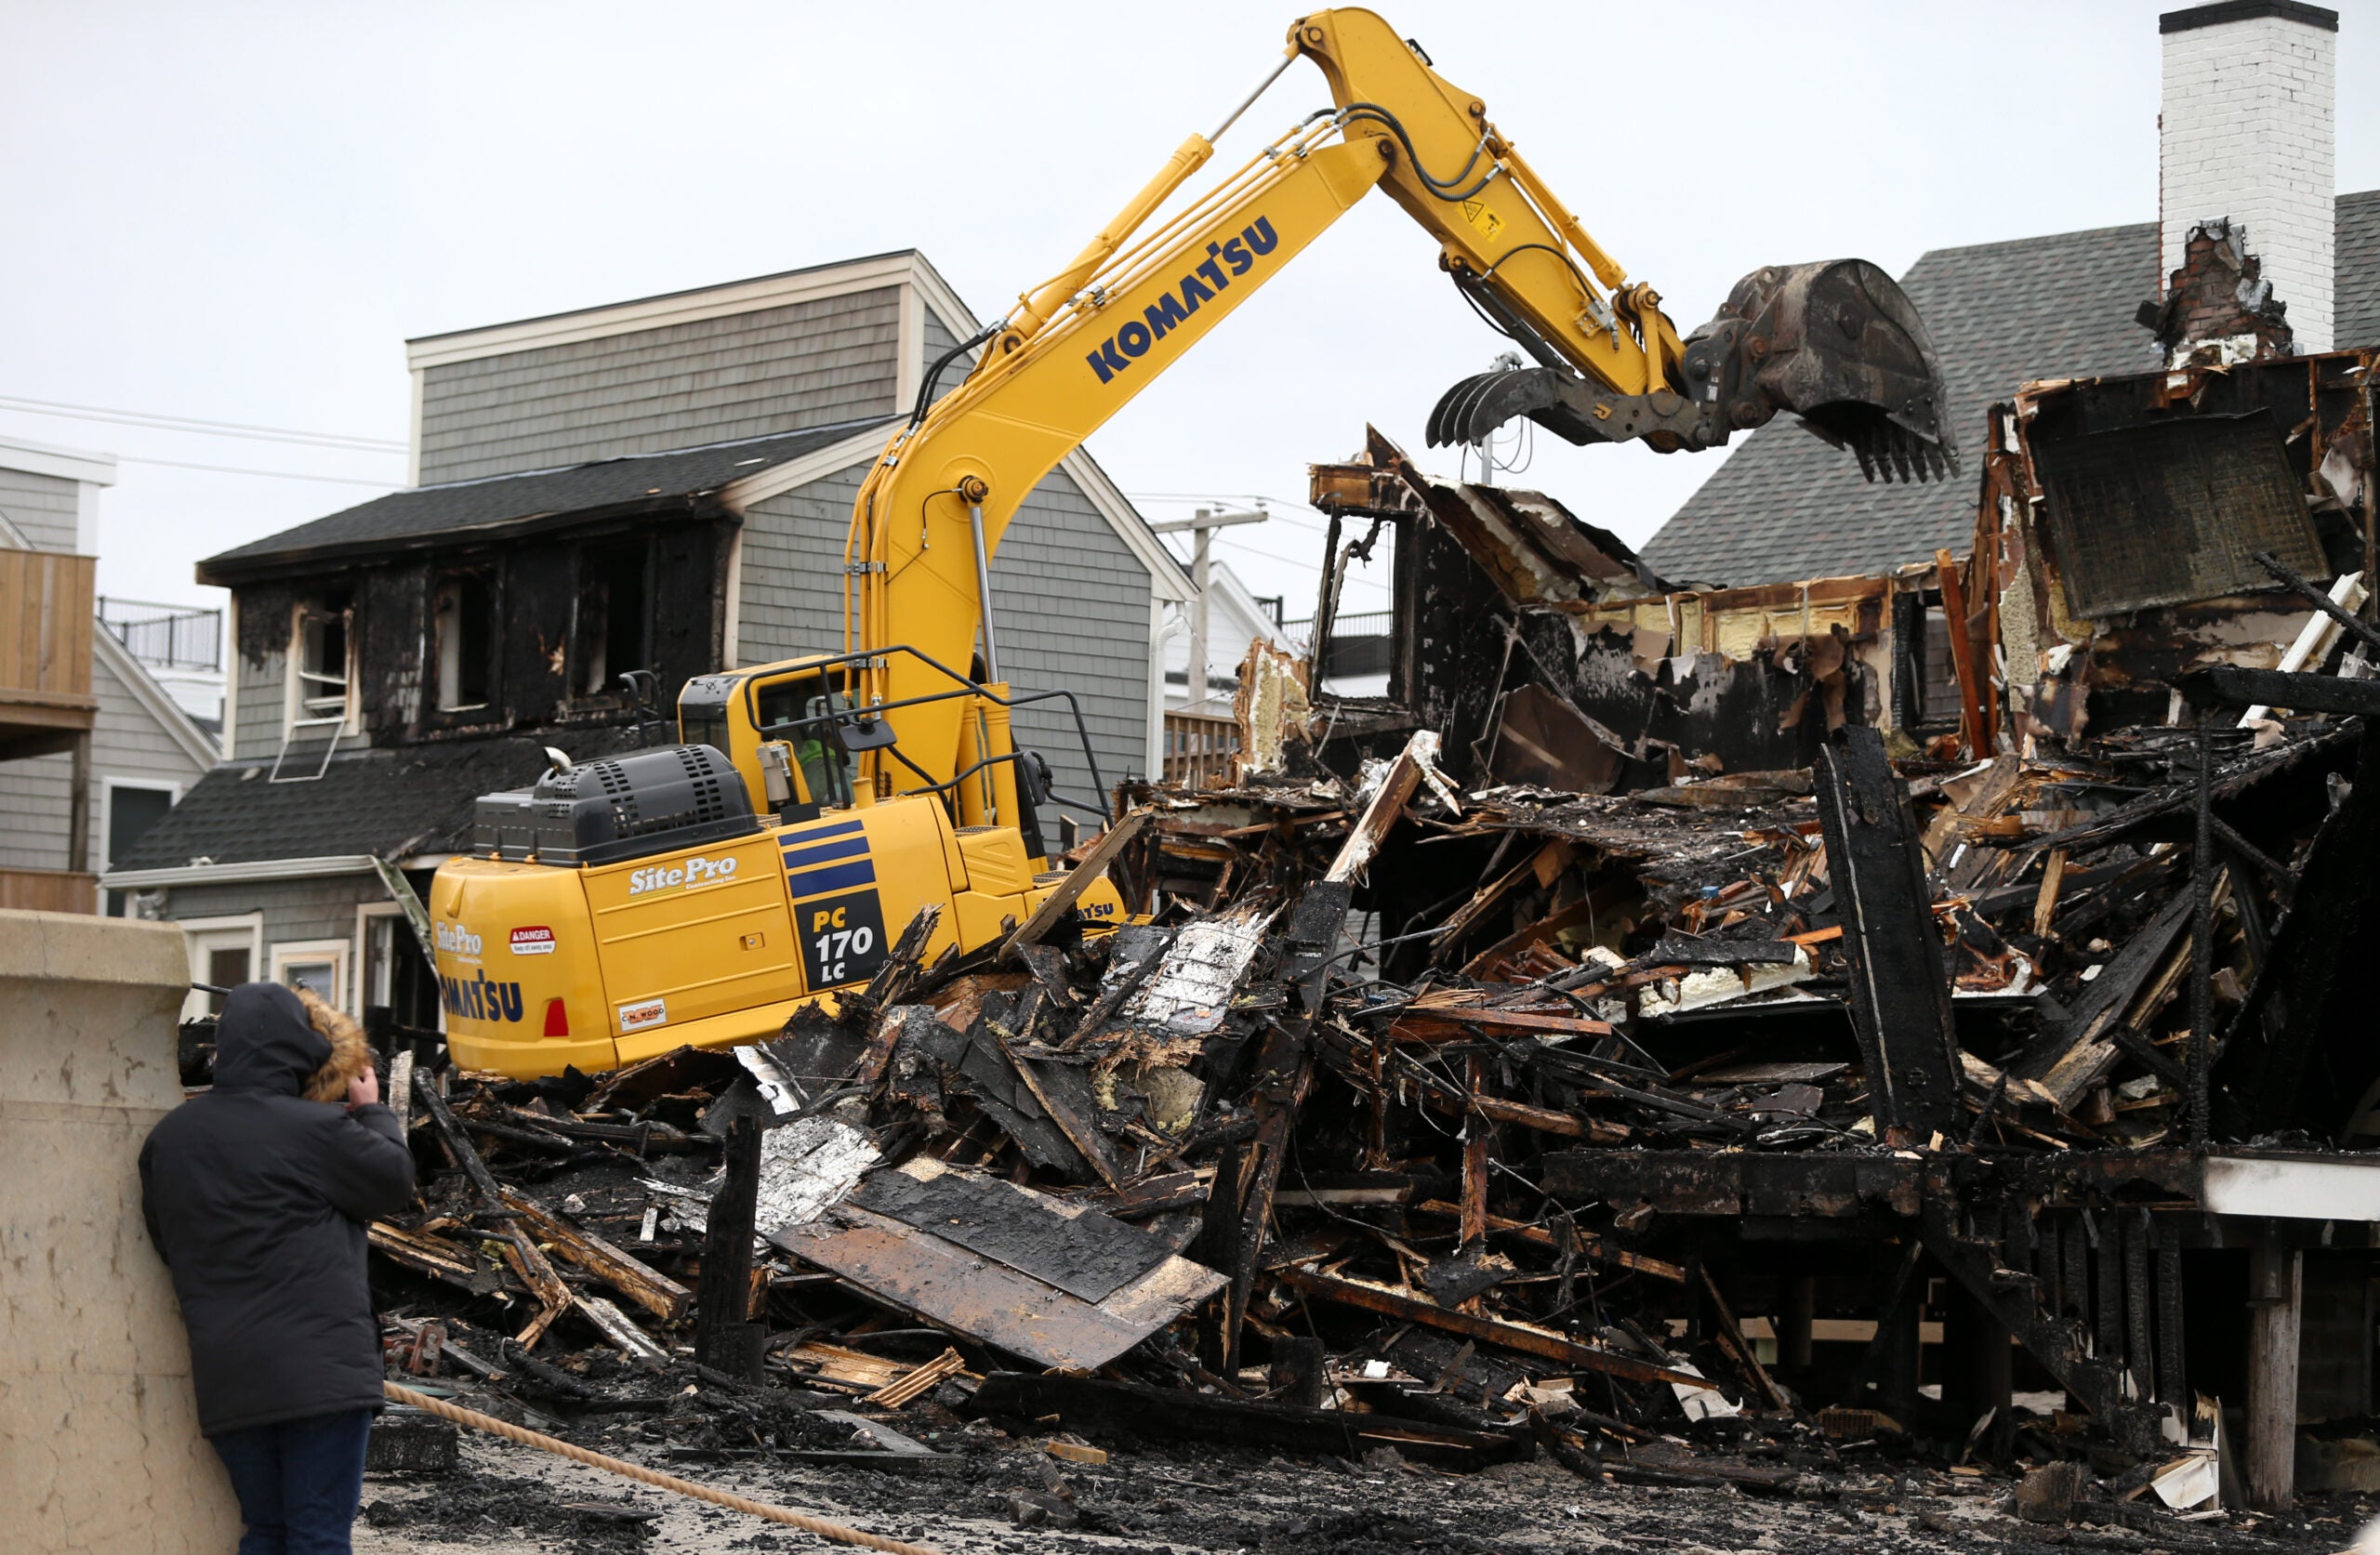 A piece of construction machinery works to demolish the charred remains of a Scituate home destroyed in a five-alarm fire Friday night. It is daytime, and a person in a heavy winter coat is seen in the foreground, facing the demolition with their back to the camera.